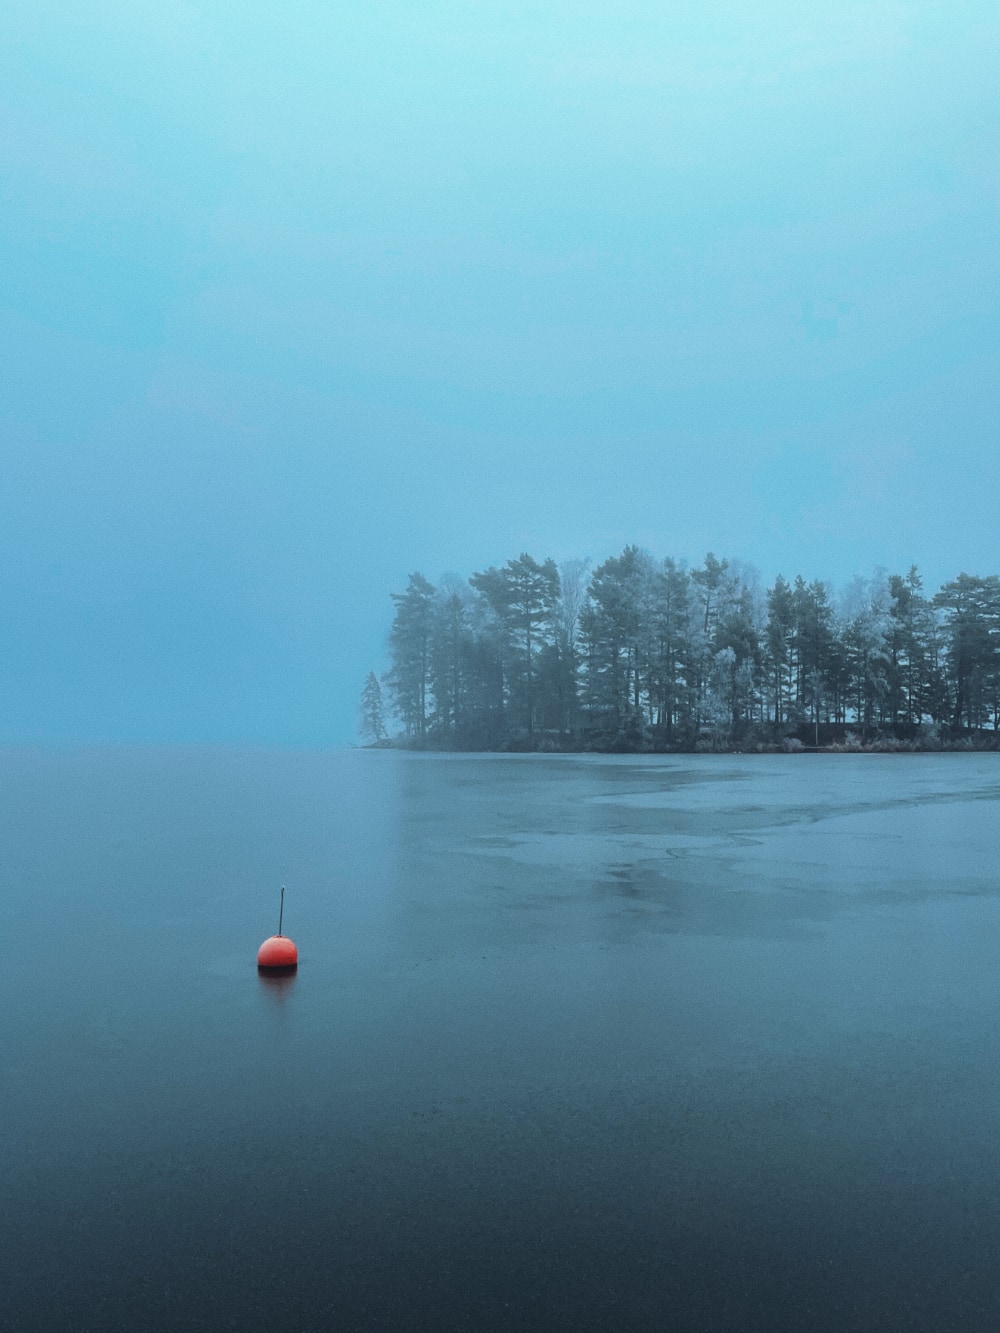 A misty, cold view over a frozen lake. Trees partly covered in snow. In the foreground, a lonely red buoy is stuck in the ice.